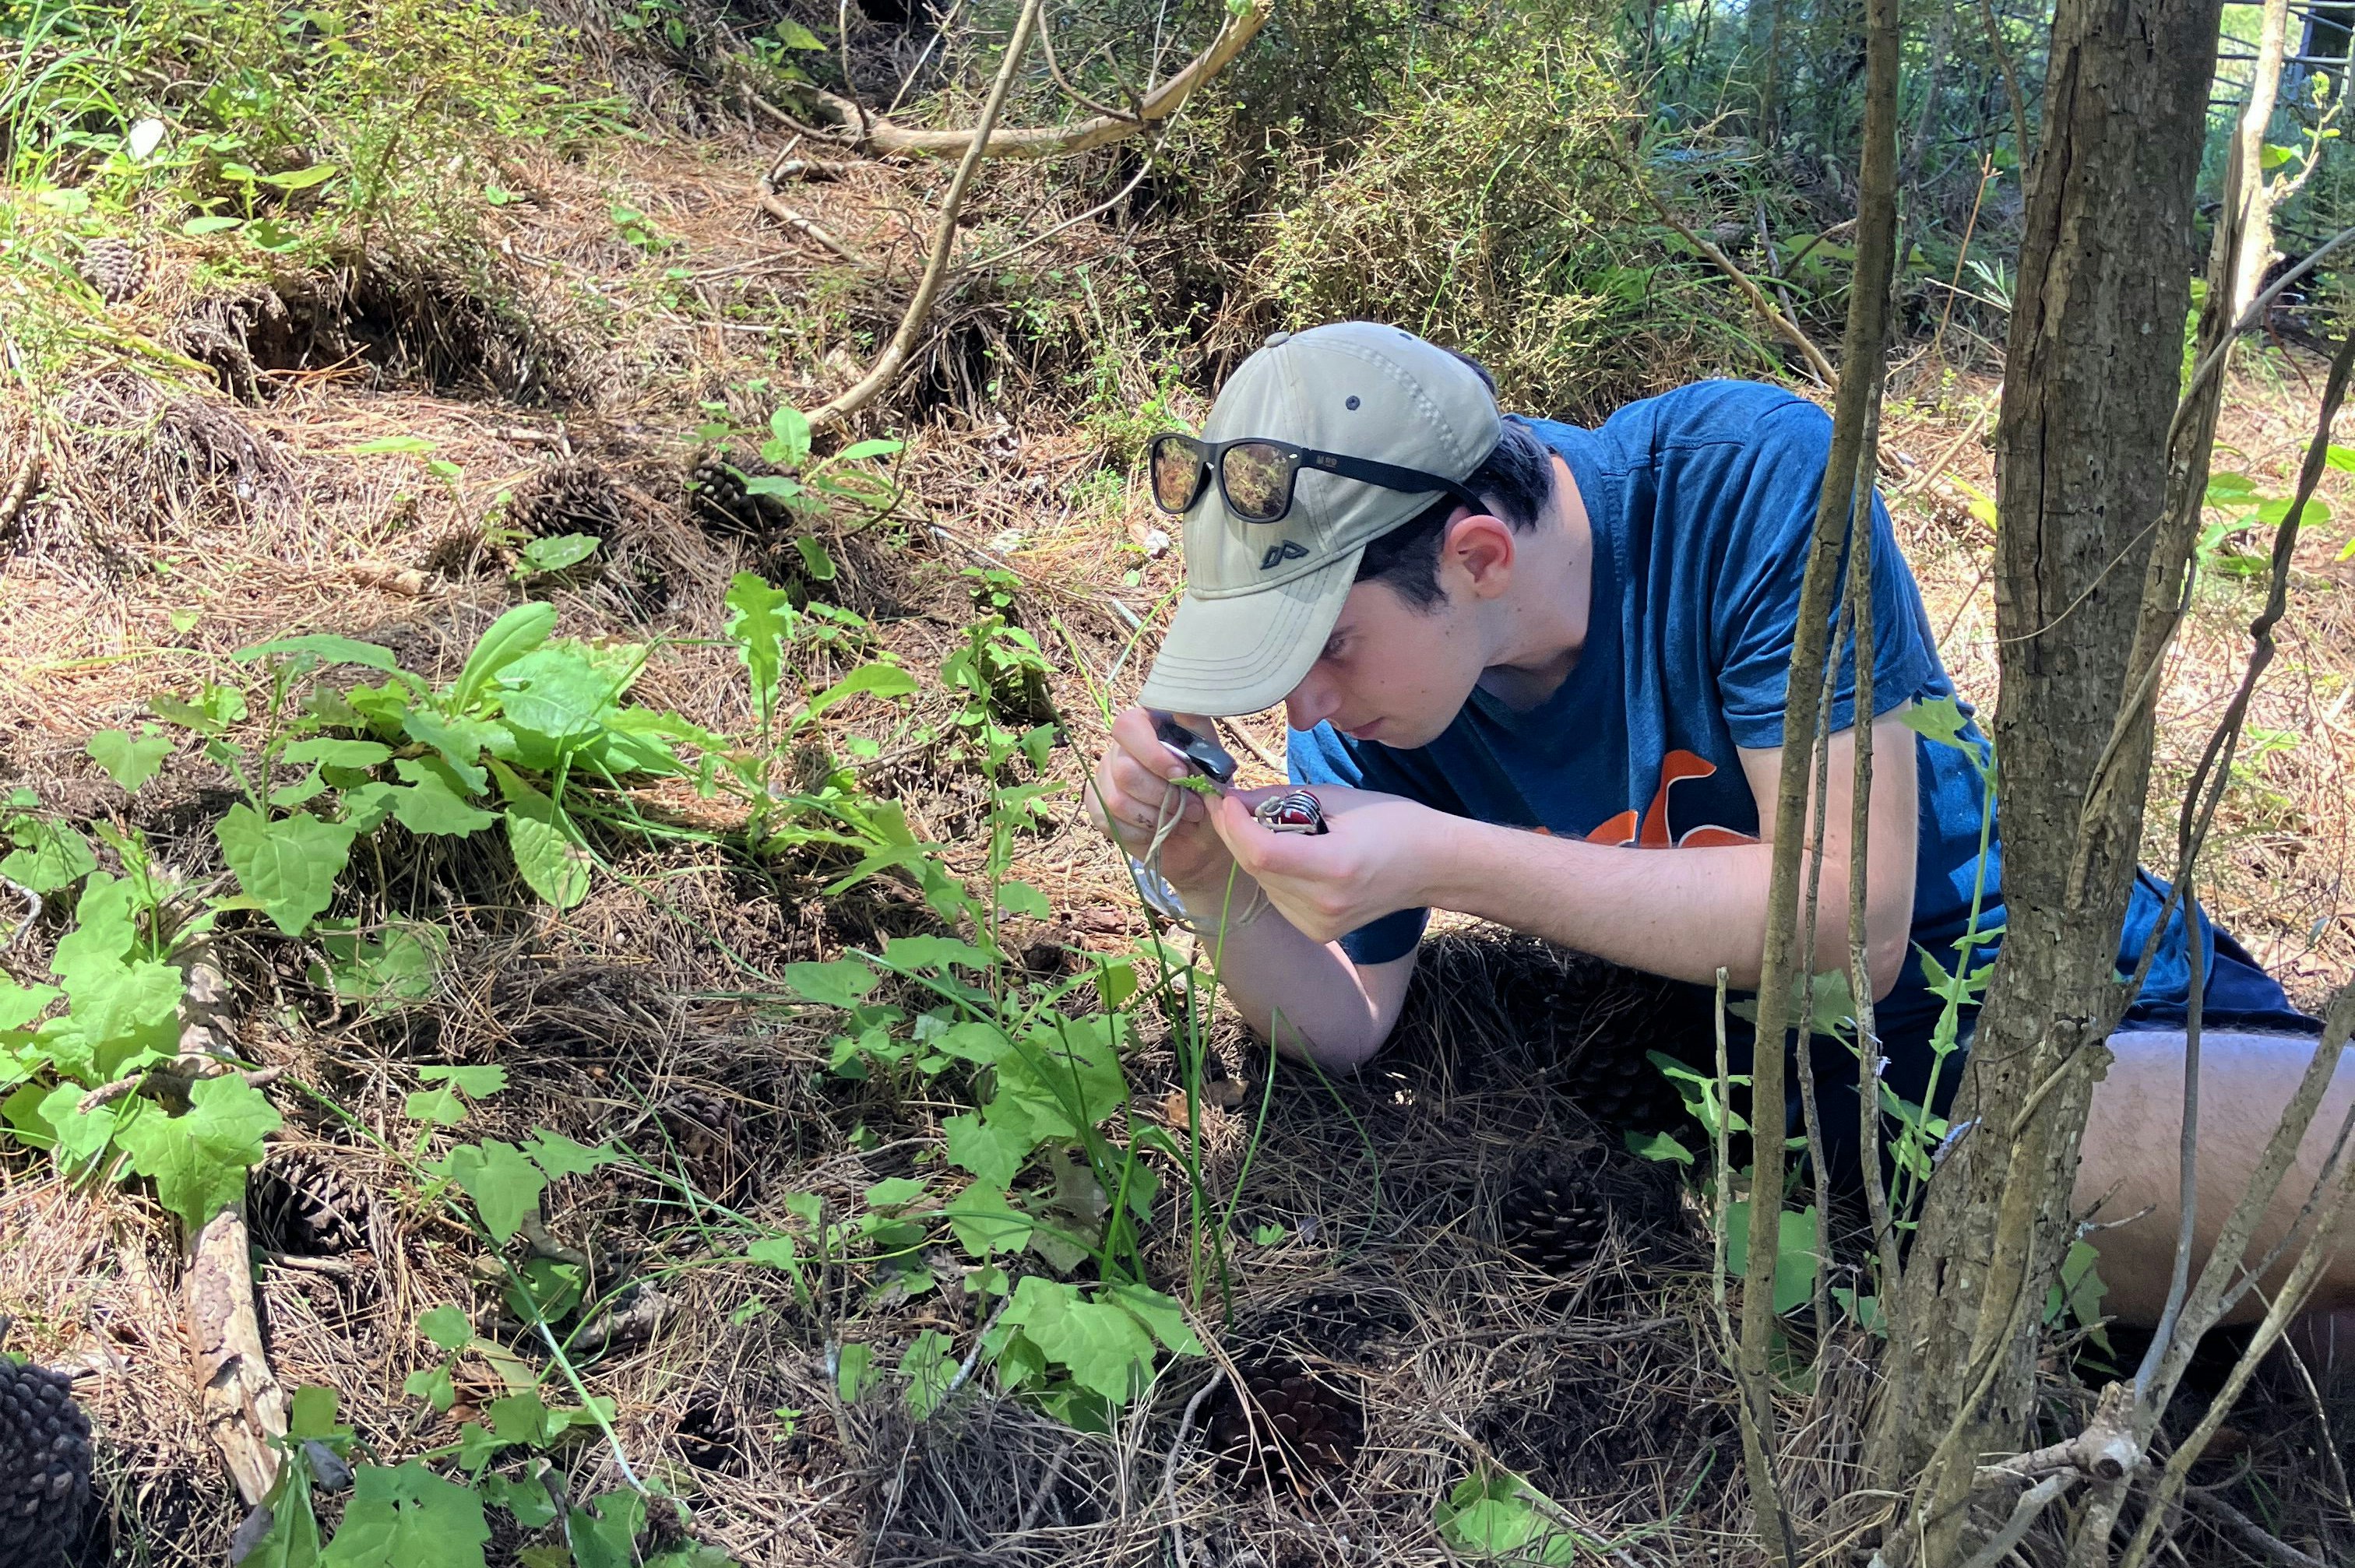 A man in a blue tshirt and a cap is crouched down on the ground and inspecting a small plant.